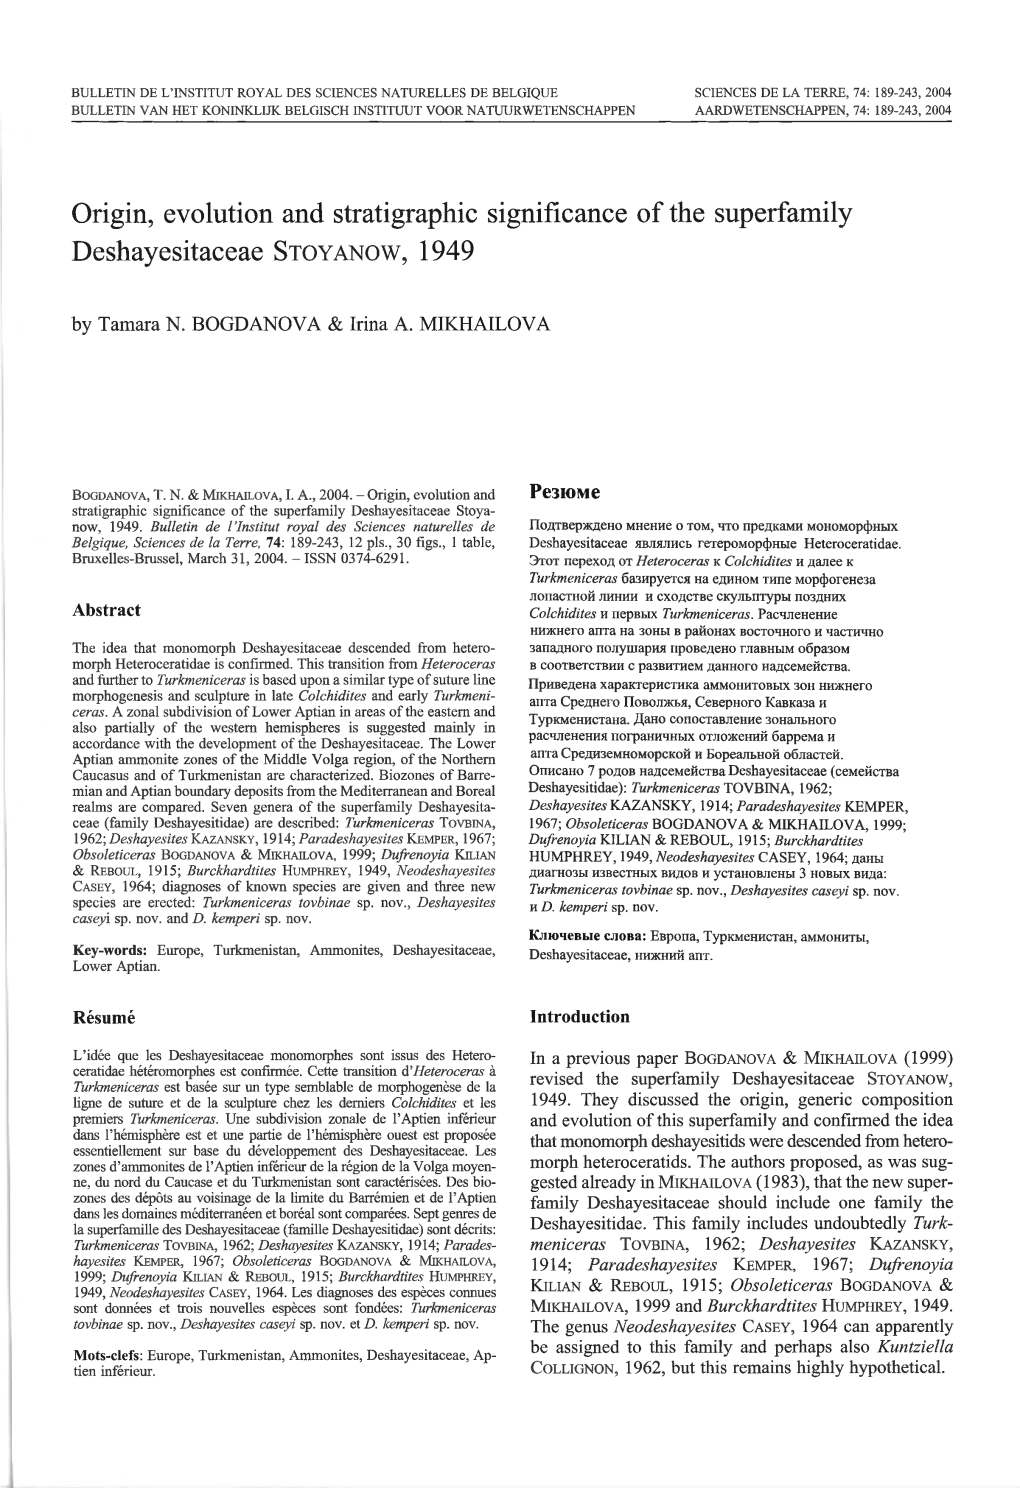 Stratigraphie Significance of the Superfamily Deshayesitaceae Stoyanow, 1949 by Tamara N